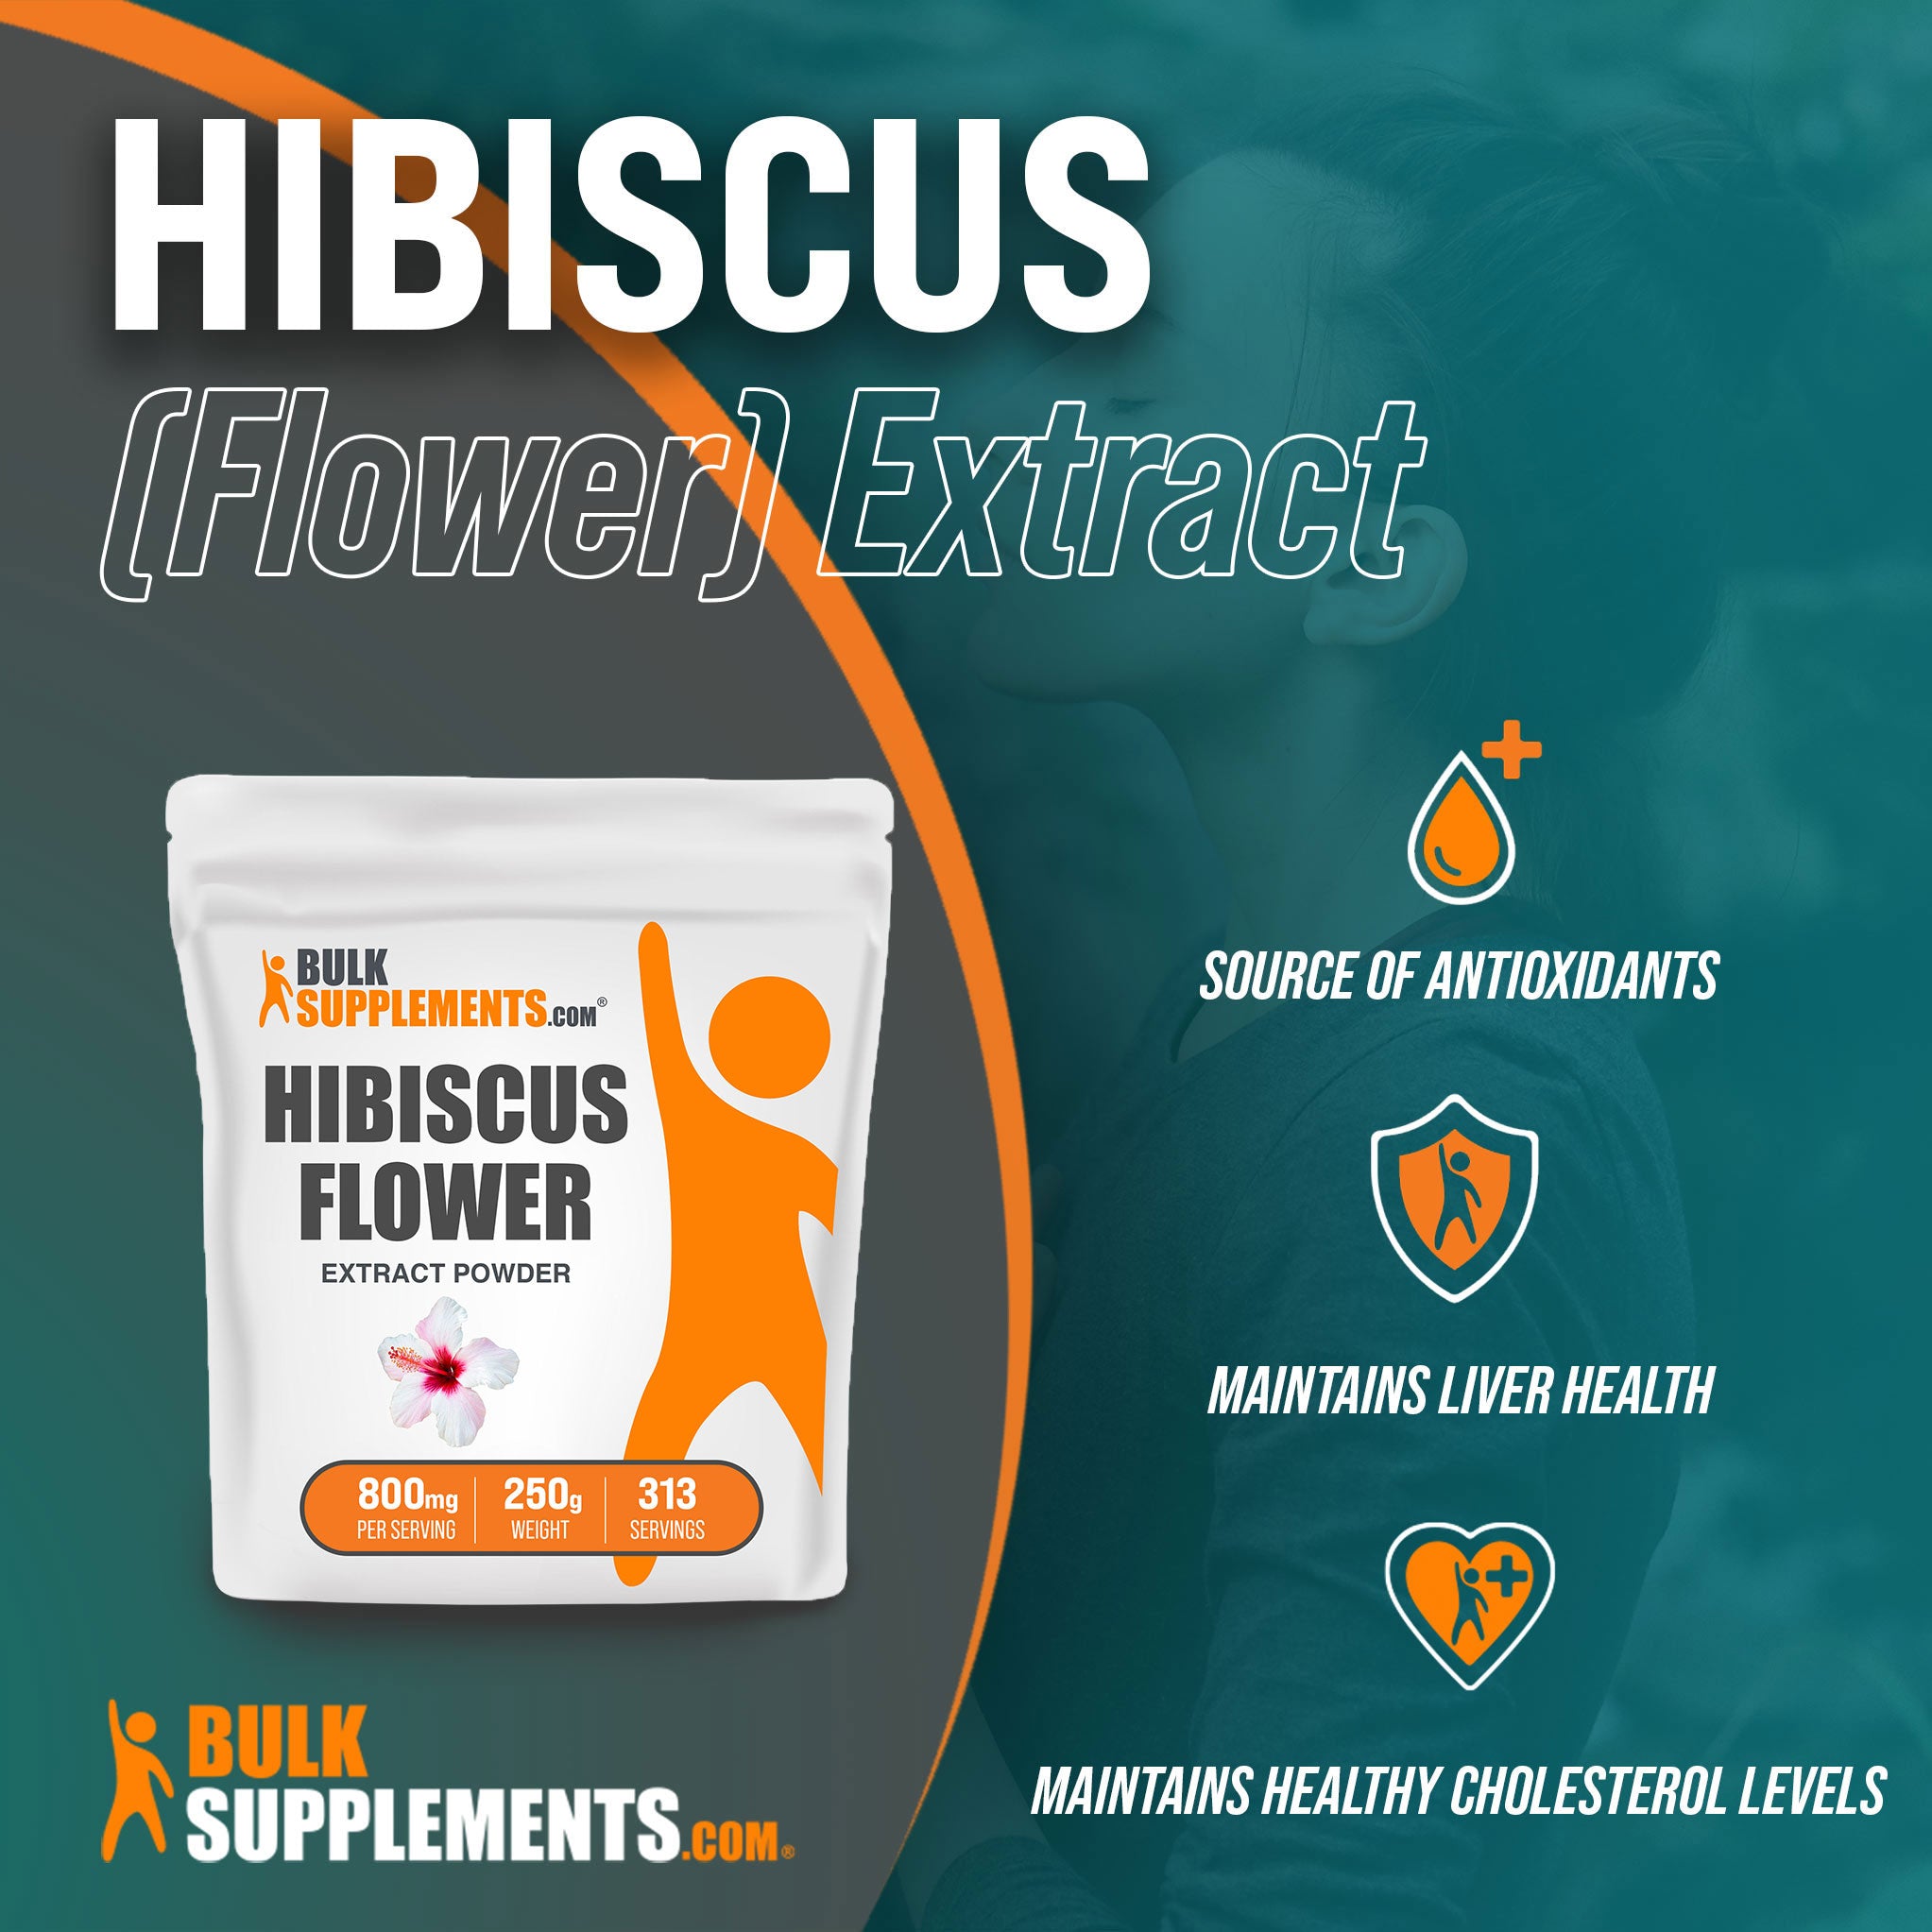 Benefits of Hibiscus Flower Extract; source of antioxidants, maintains liver health, maintains healthy cholesterol levels